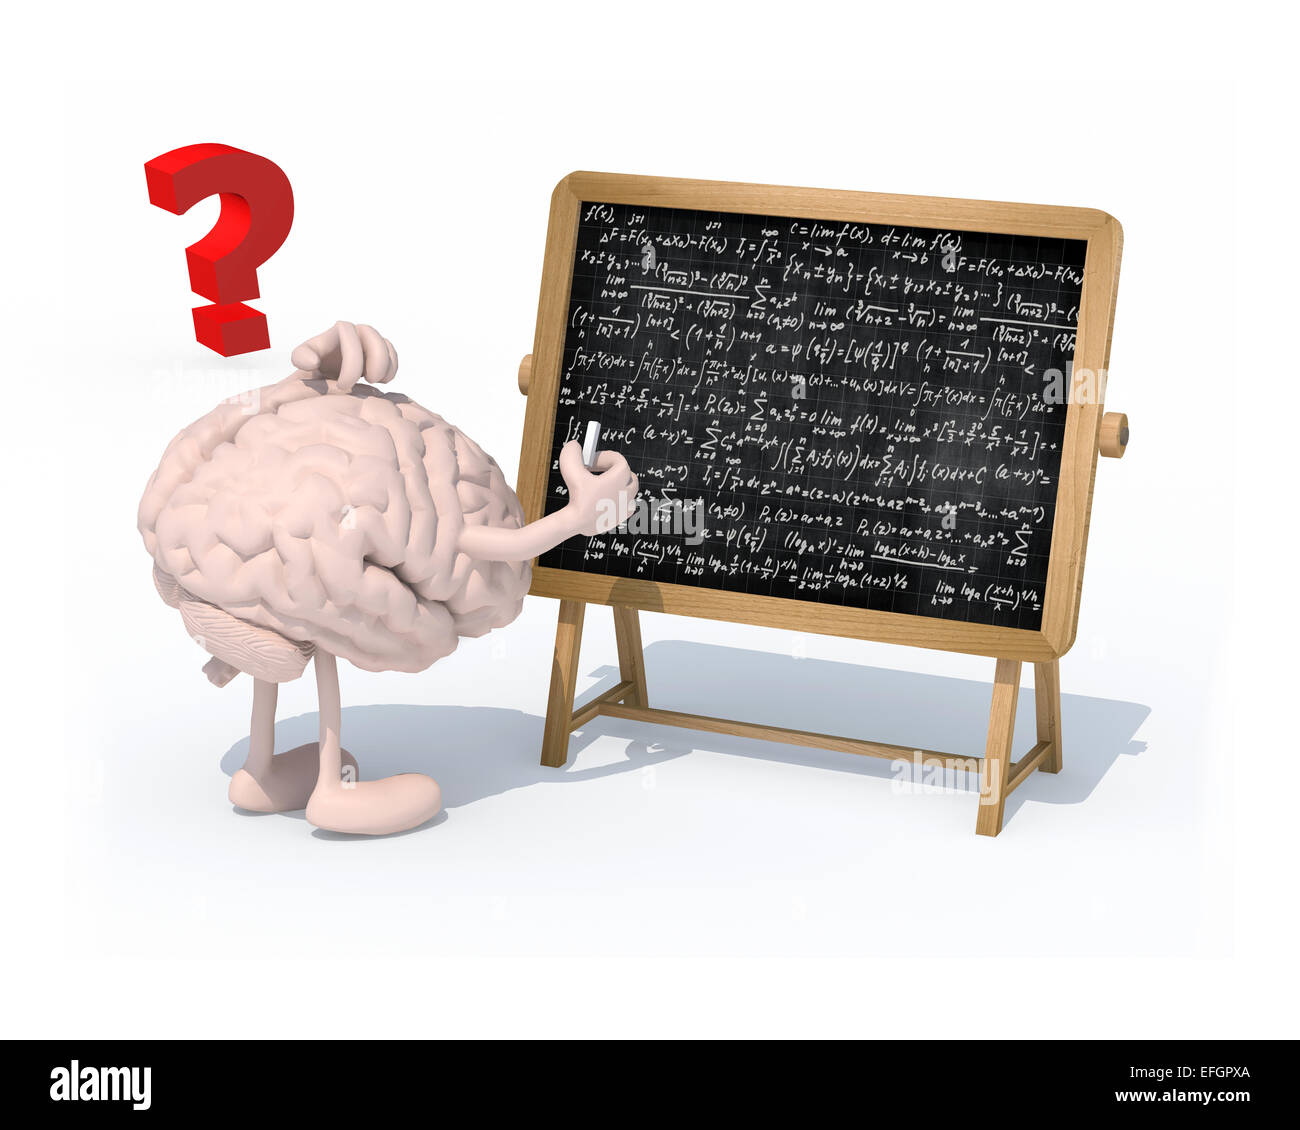 brain with arms, legs and chalk on hand in front of blackboard with math formulas, 3d illustration Stock Photo